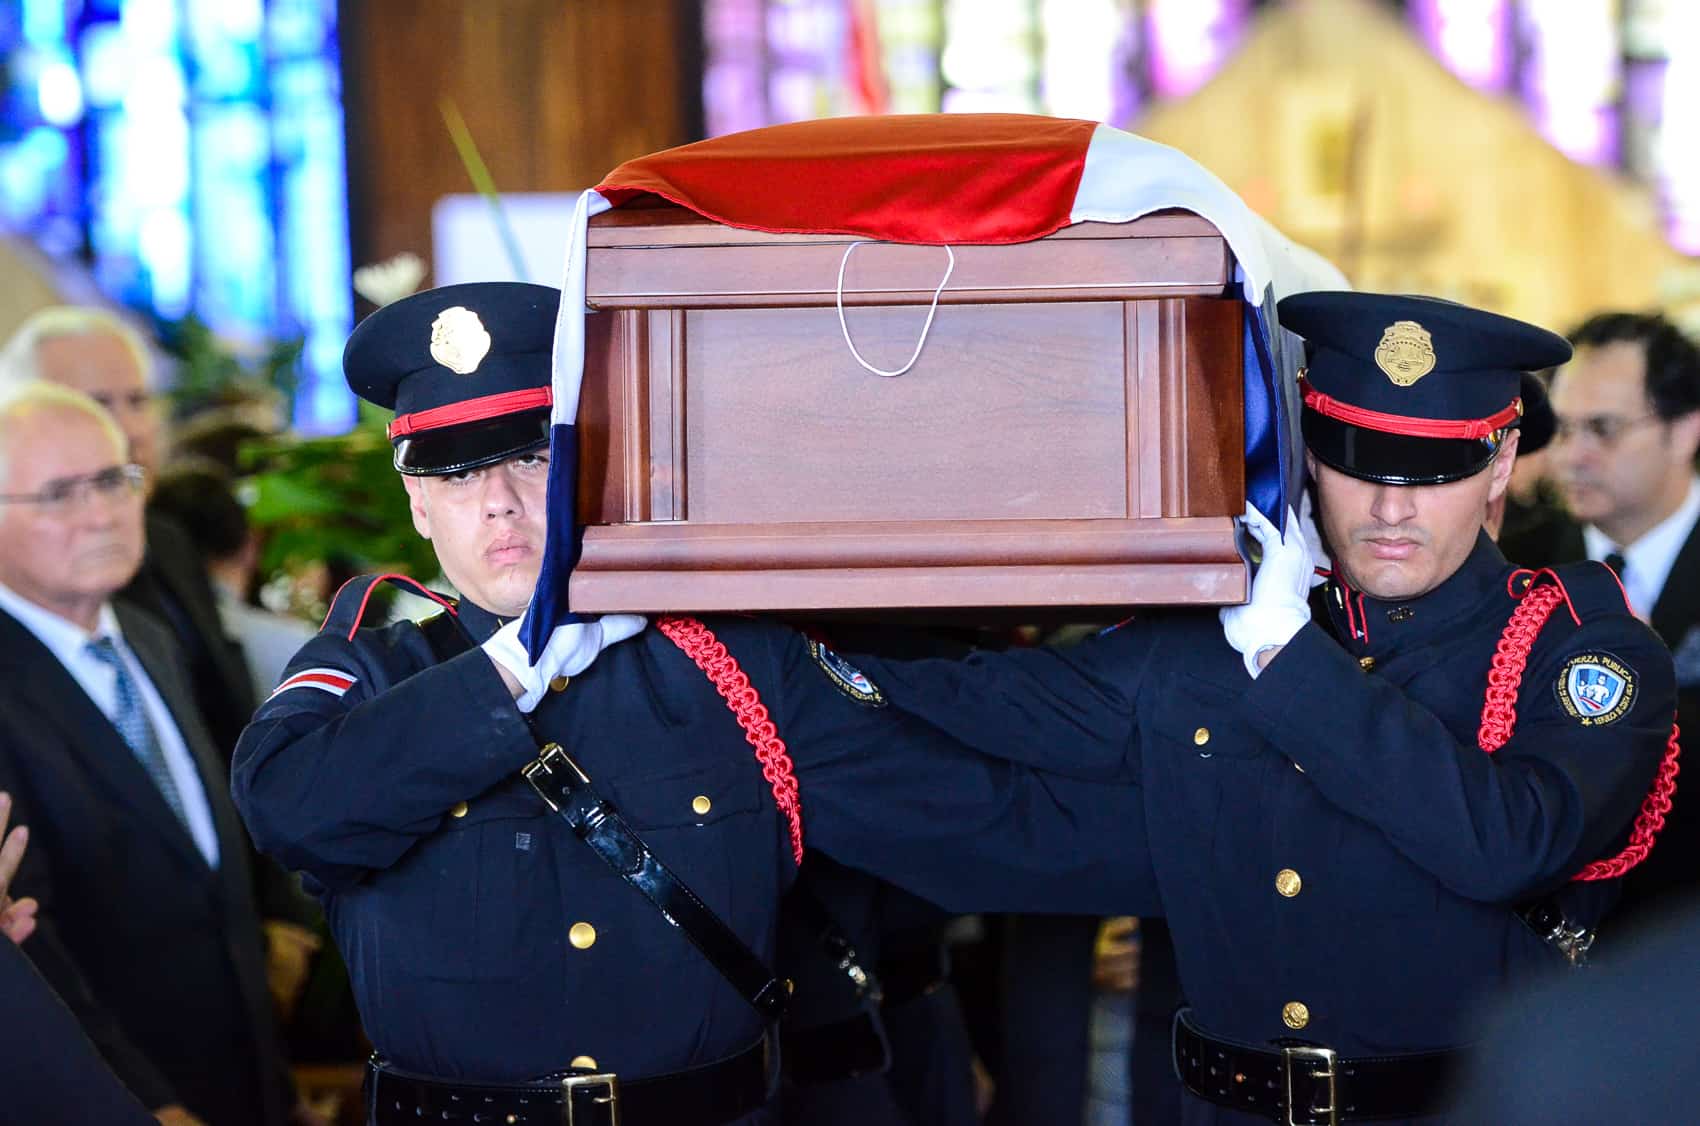 Don Beto Cañas is laid to rest with full honors